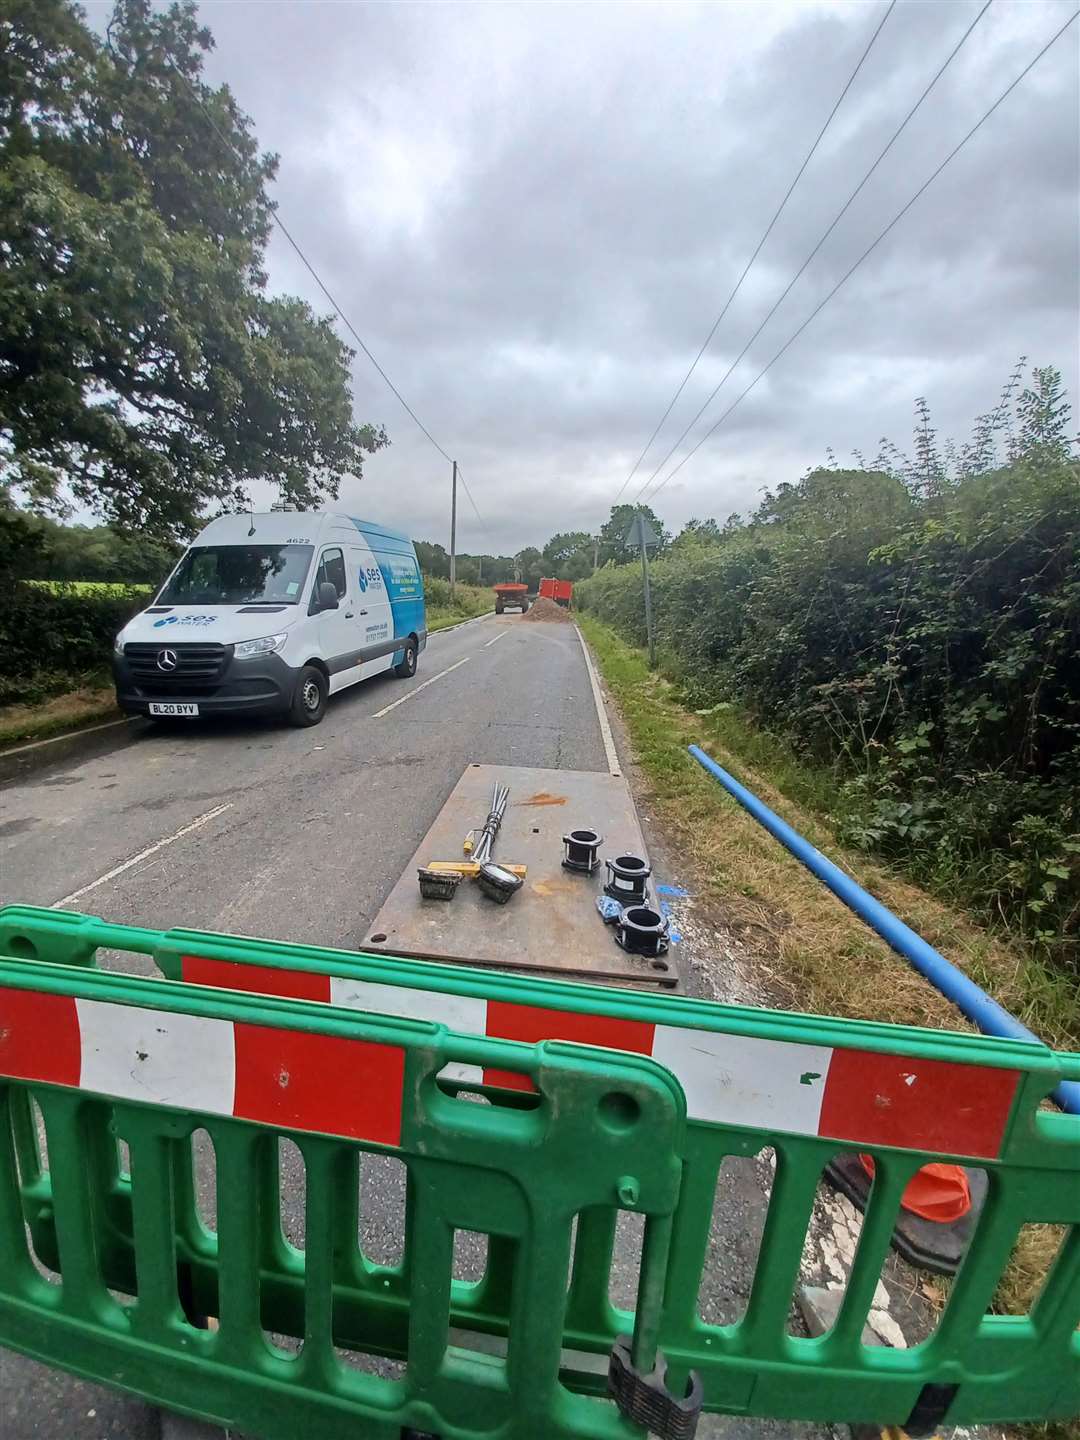 The road between Bough Beech and Chiddingstone Causeway is closed for water main replacement